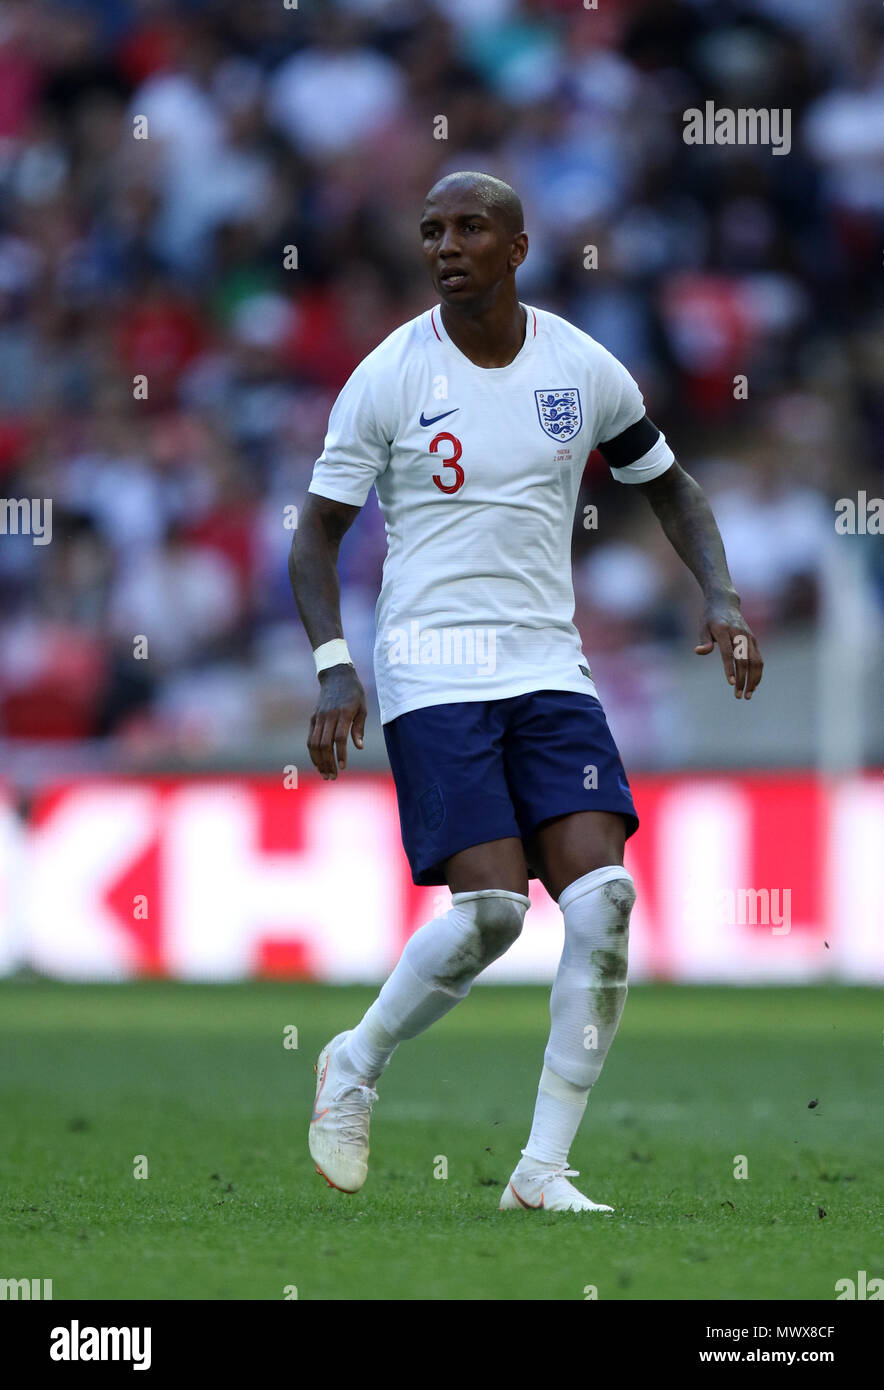 Wembley, London, UK. 2nd Jun, 2018. Ashley Young (E) at the England v Nigeria Friendly International match, at Wembley Stadium, on June 2, 2018. **This picture is for editorial use only** Credit: Paul Marriott/Alamy Live News Stock Photo